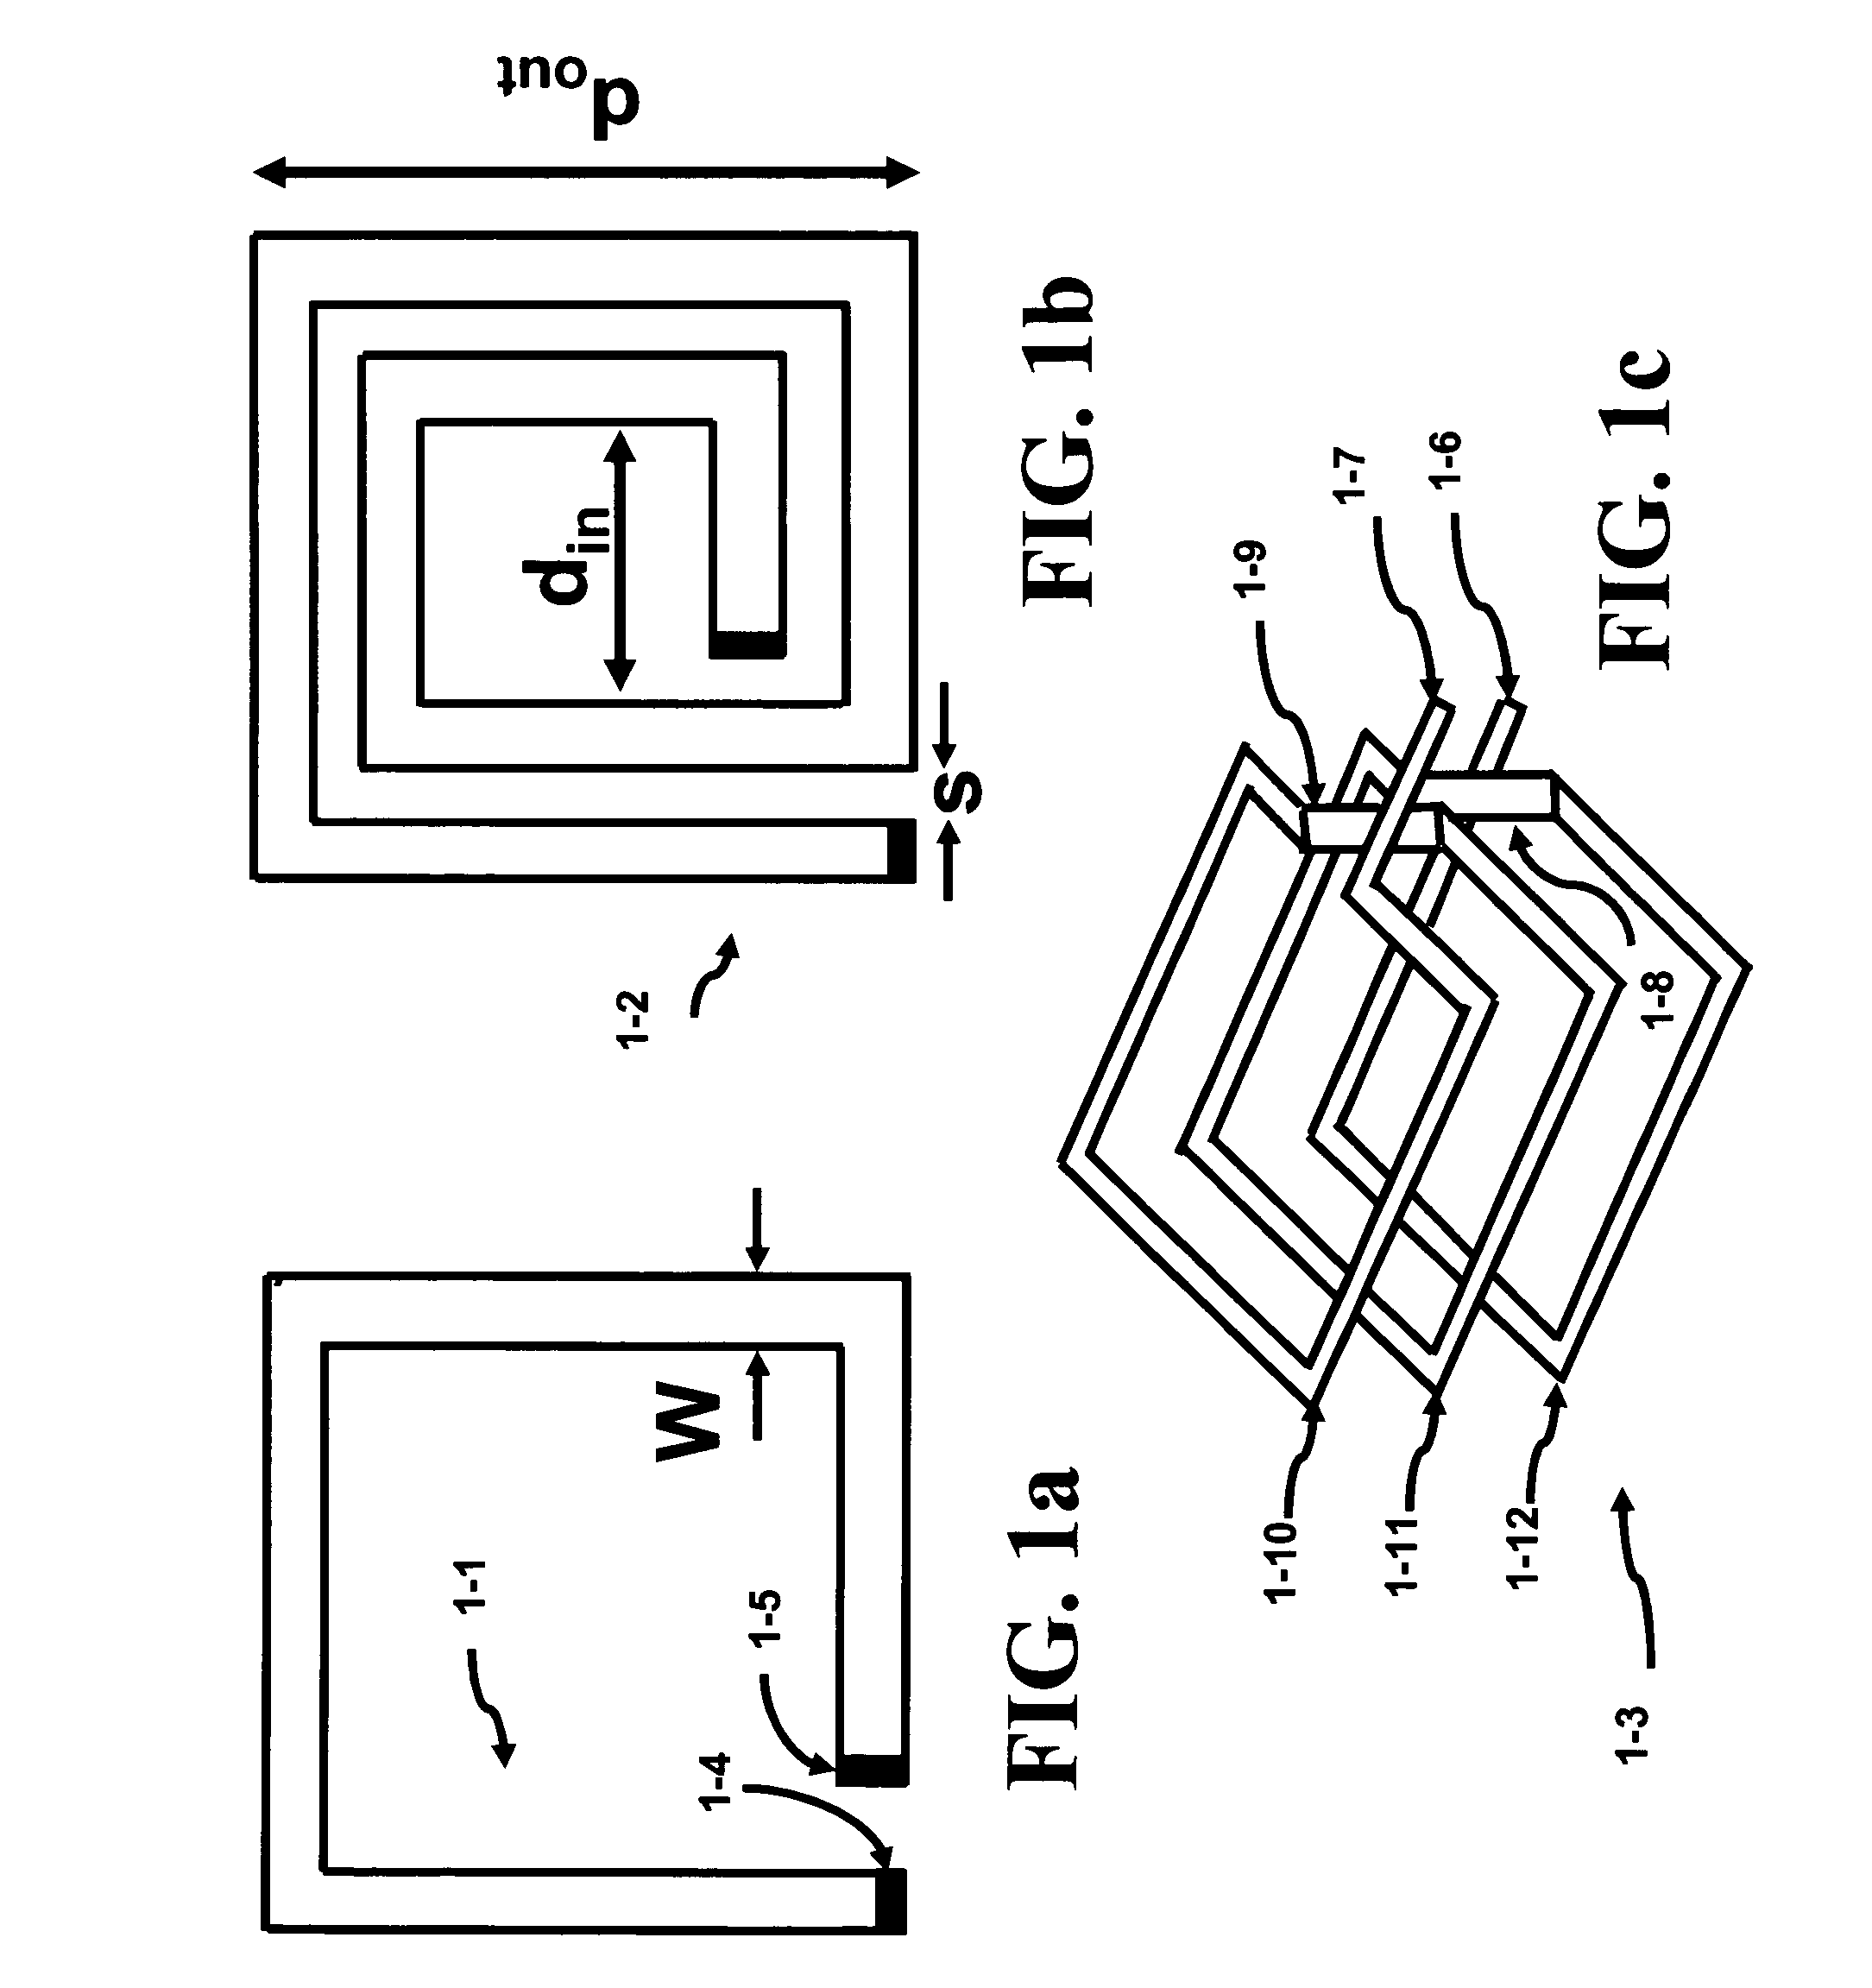 Fabrication of inductors in transformer based tank circuitry